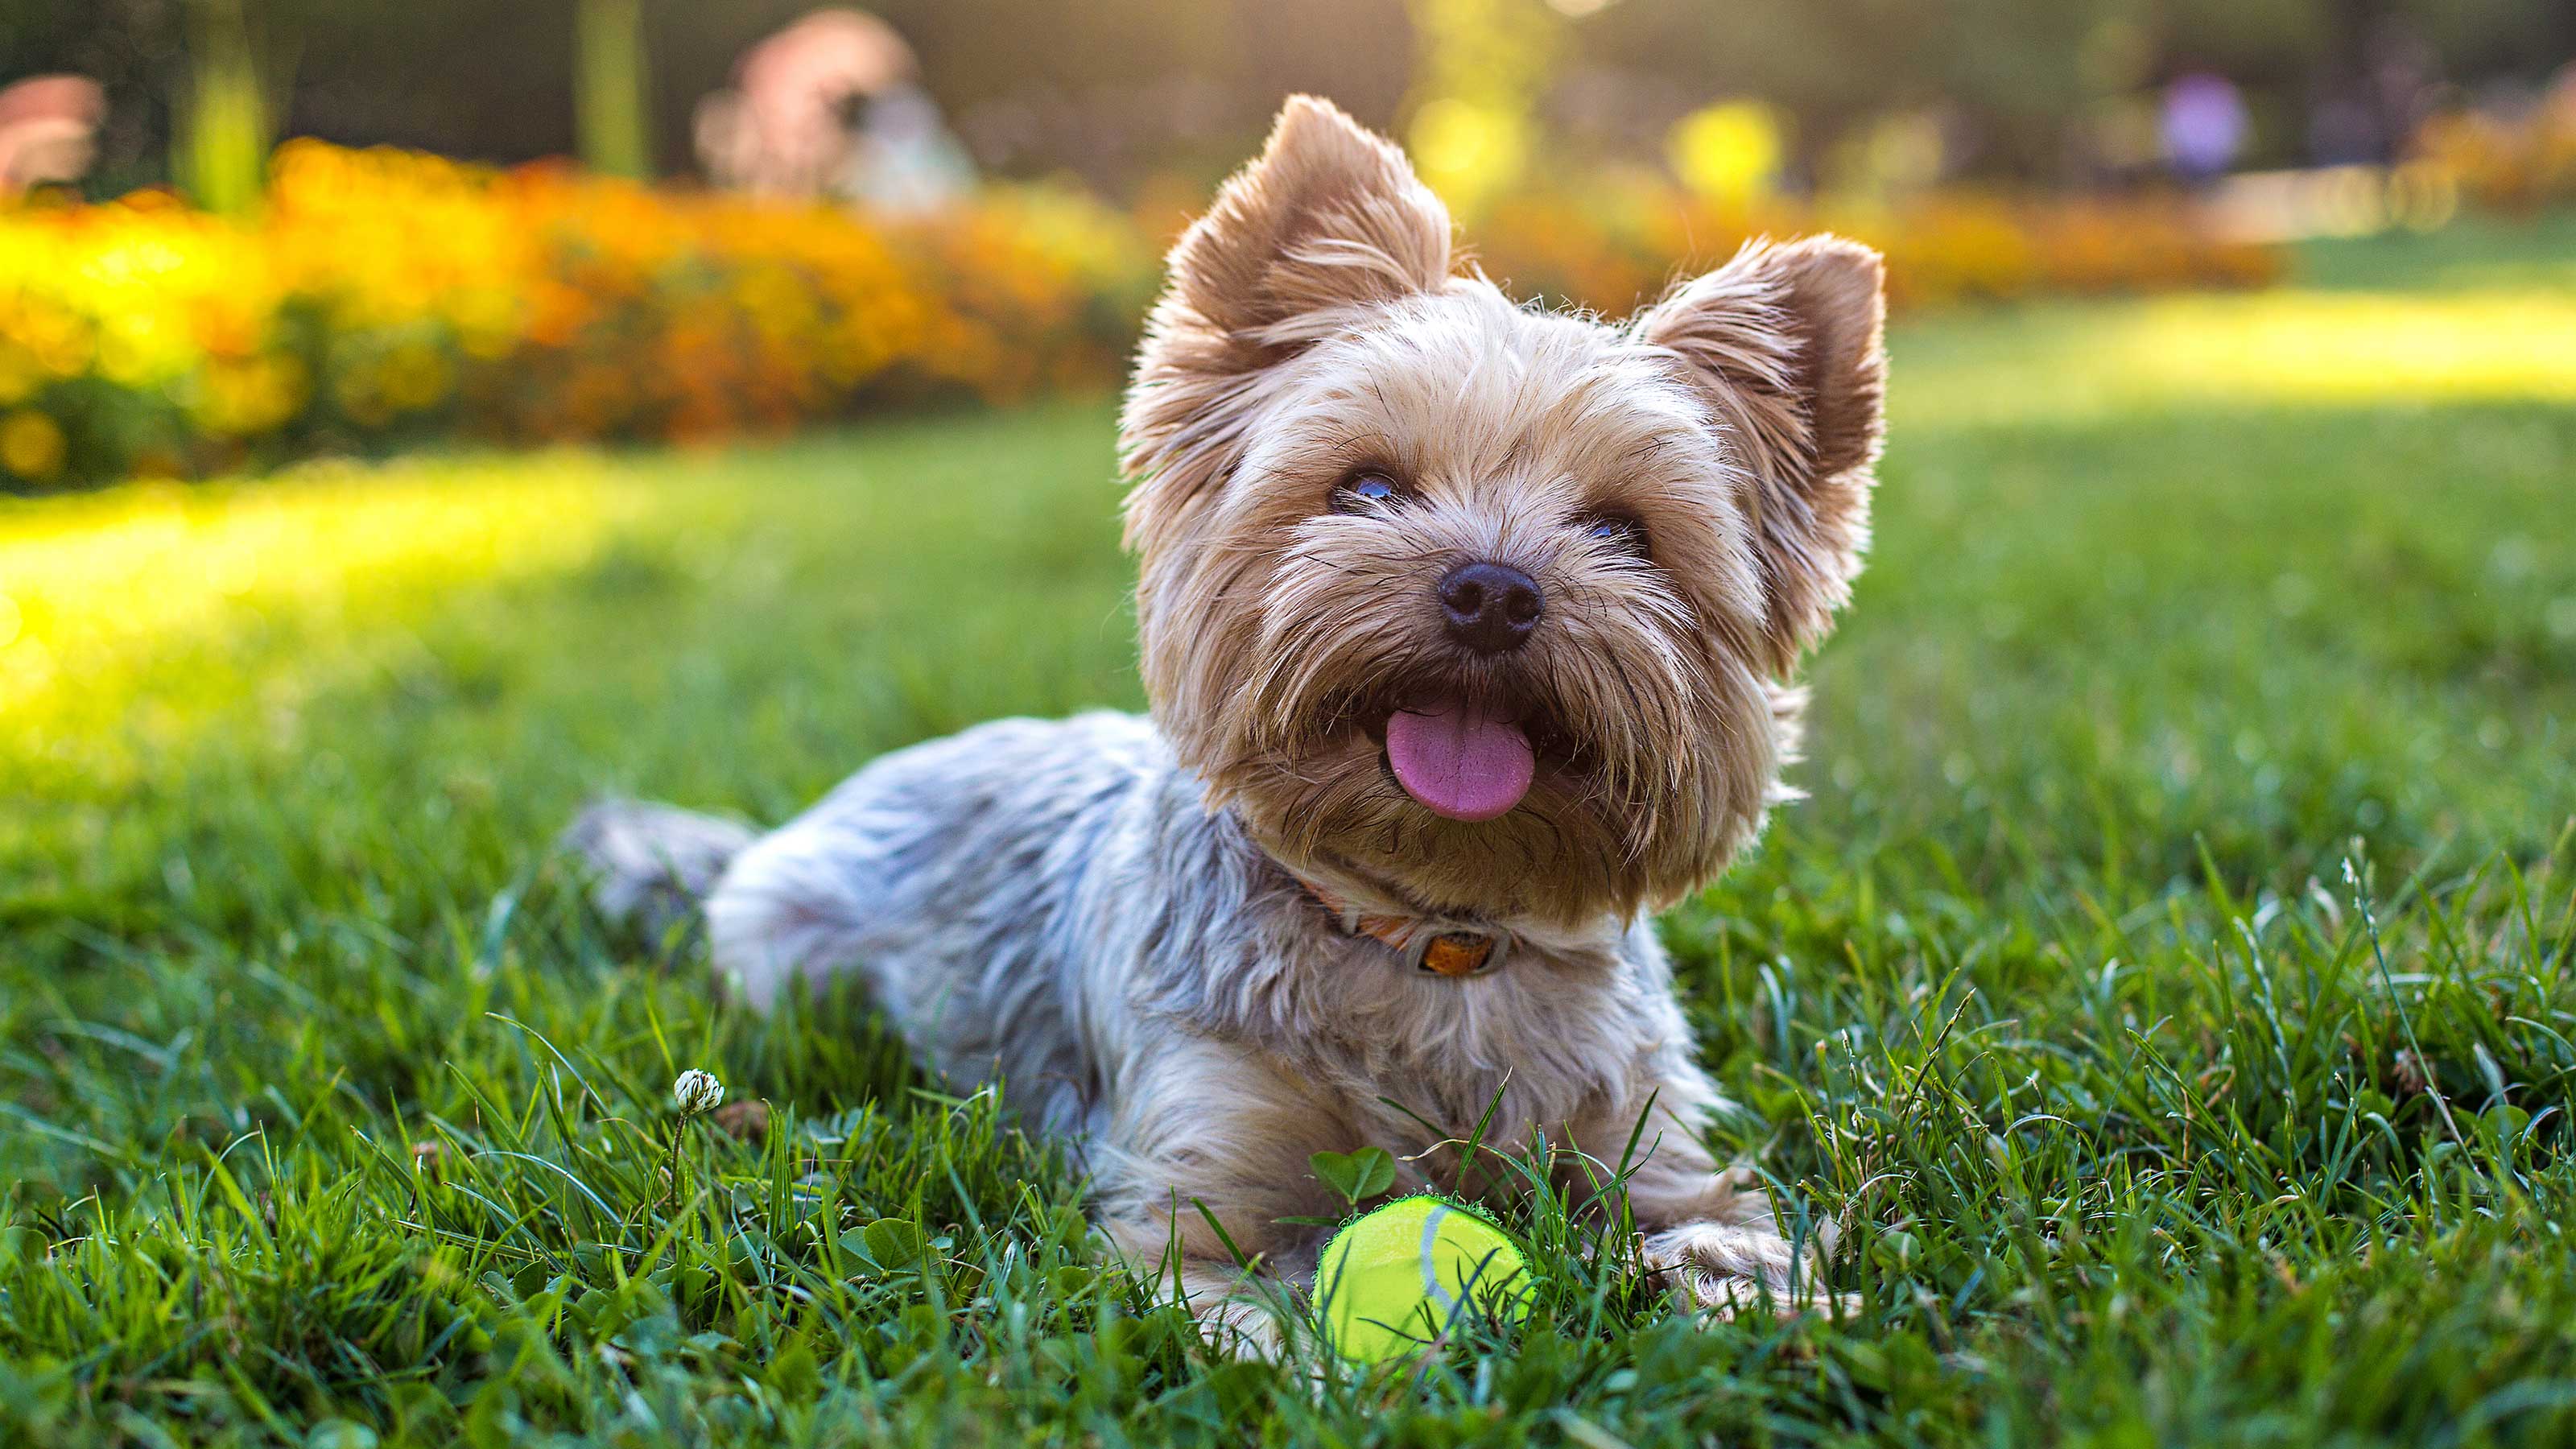 can grass seed be harmful to dogs